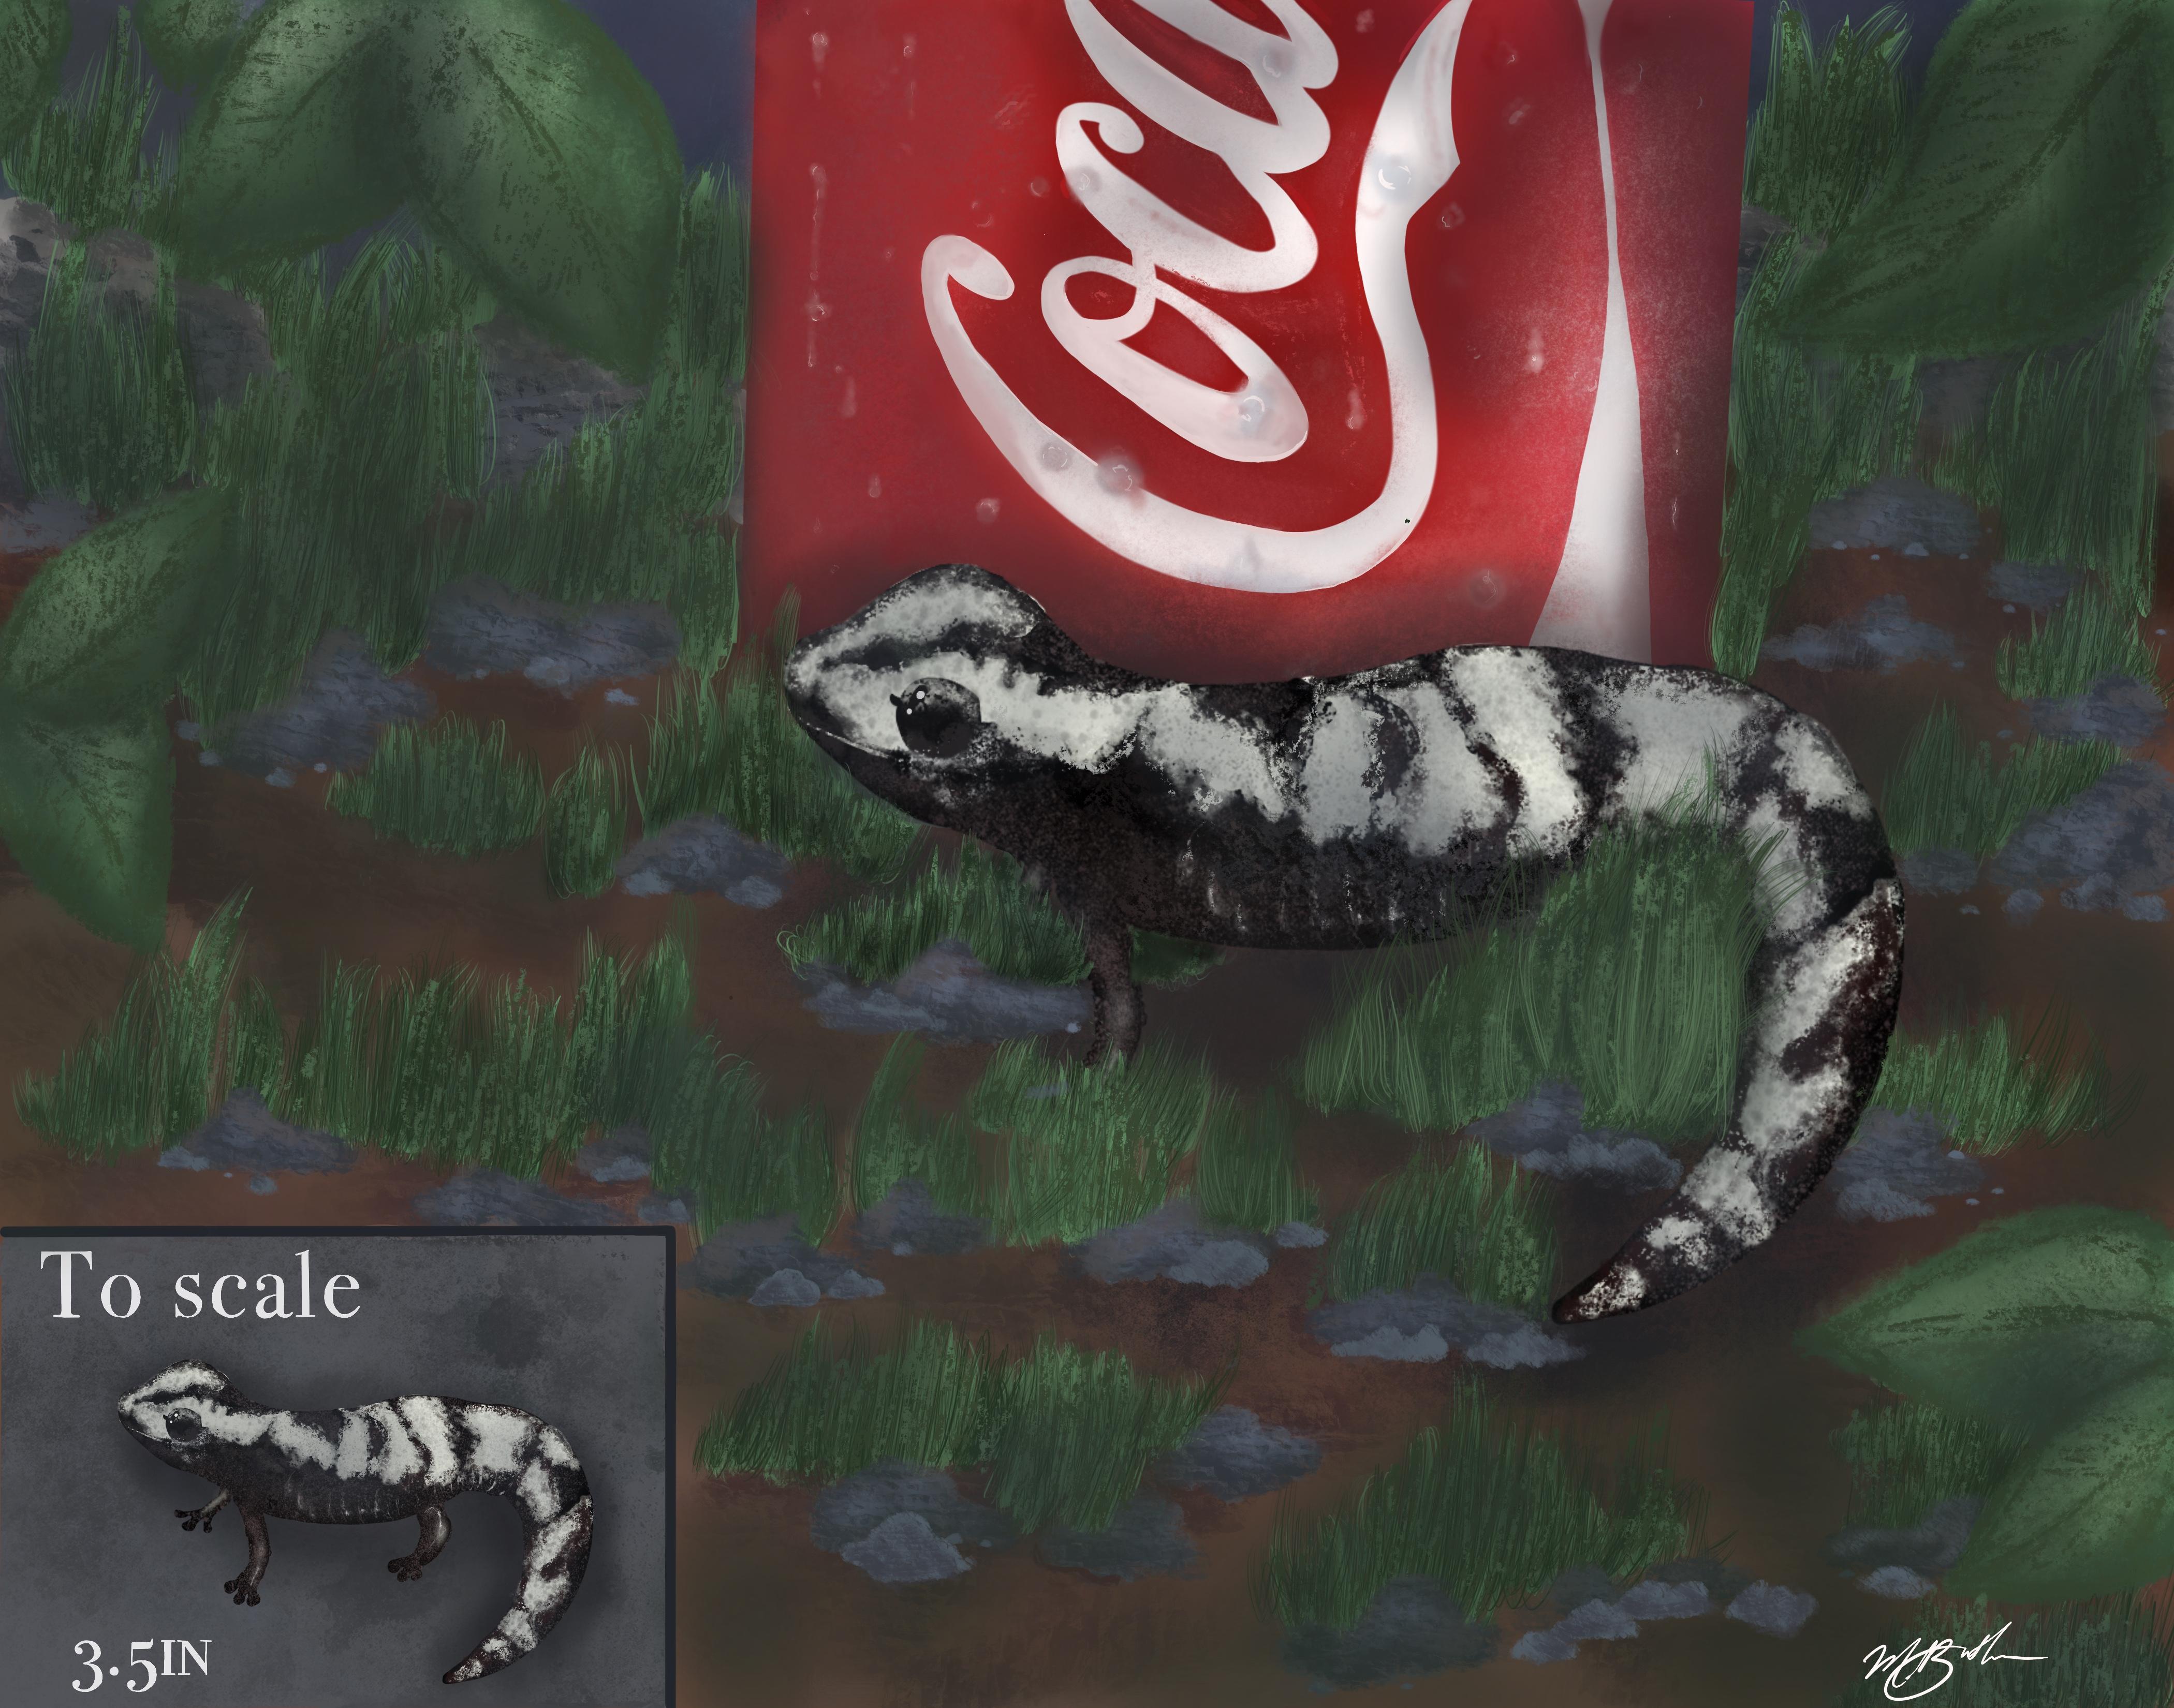 The Marbled Salamander, also known as Ambystoma opacum, is about 3.5-4.75 inches long. The salamander has a small round body camouflaged in a black, dark brown and white coloration. The average 12 ounce Coke is 2.13 inches wide and 4.83 inches tall. This illustration demonstrates the size and scale of the Marbled Salamander compared to a Coke can. Comparing the salamander to the Coke can shows how small the creature is displayed next to an object that’s size is well known and consistent. 